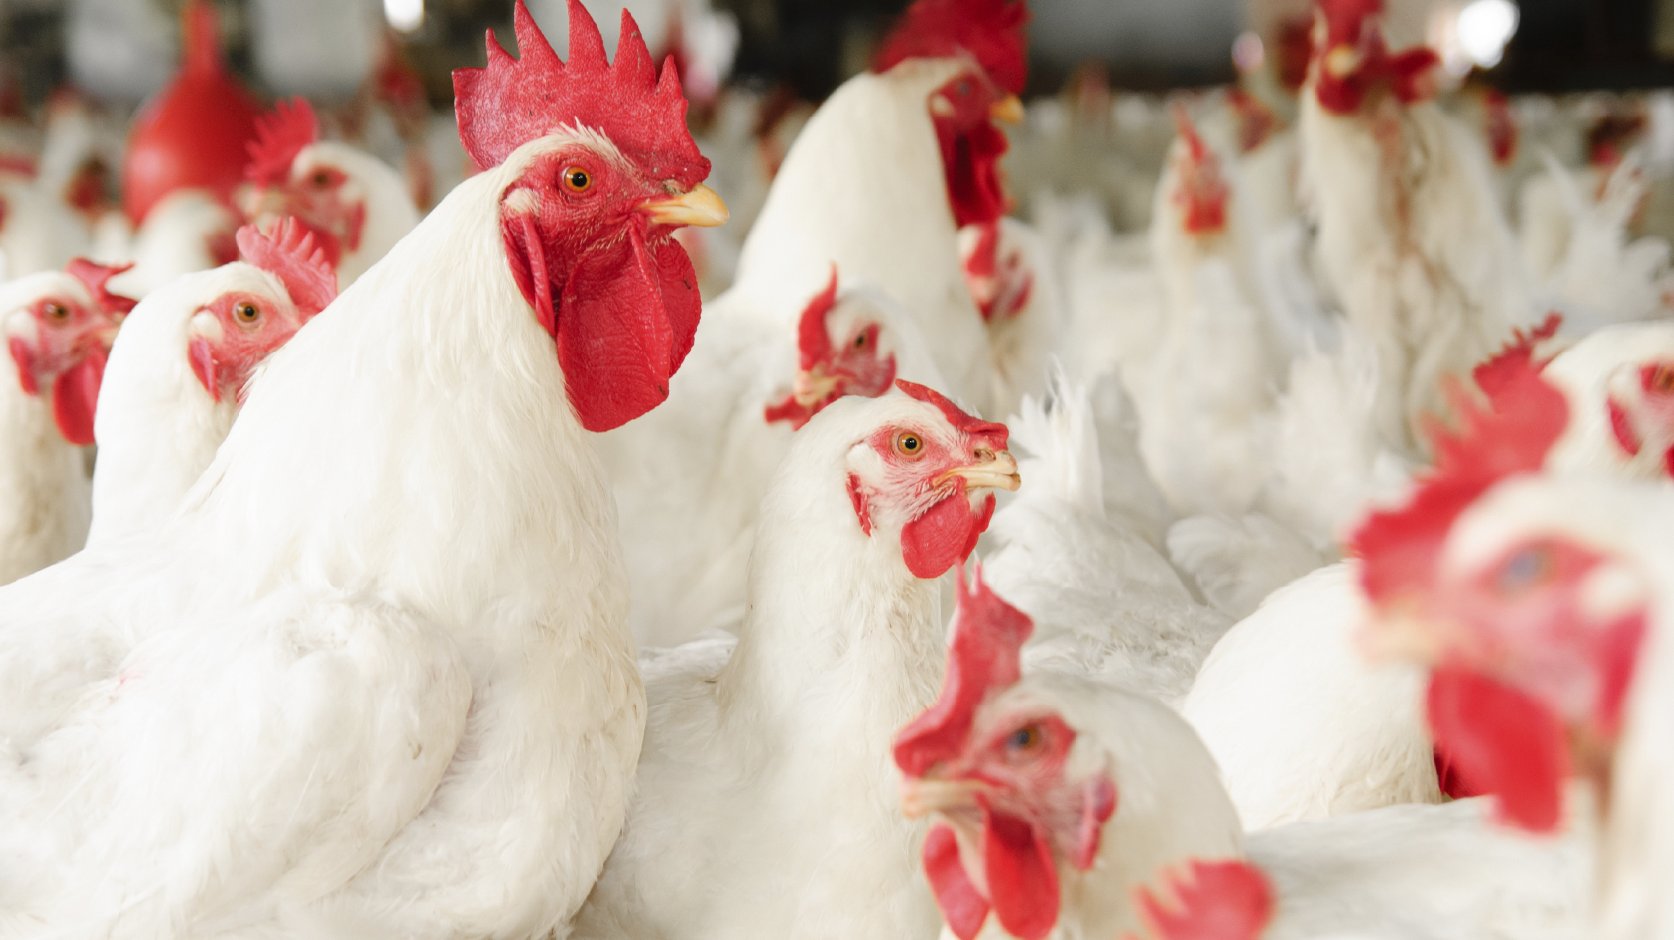 Do these chickens look medicated? Photo: iStockphoto